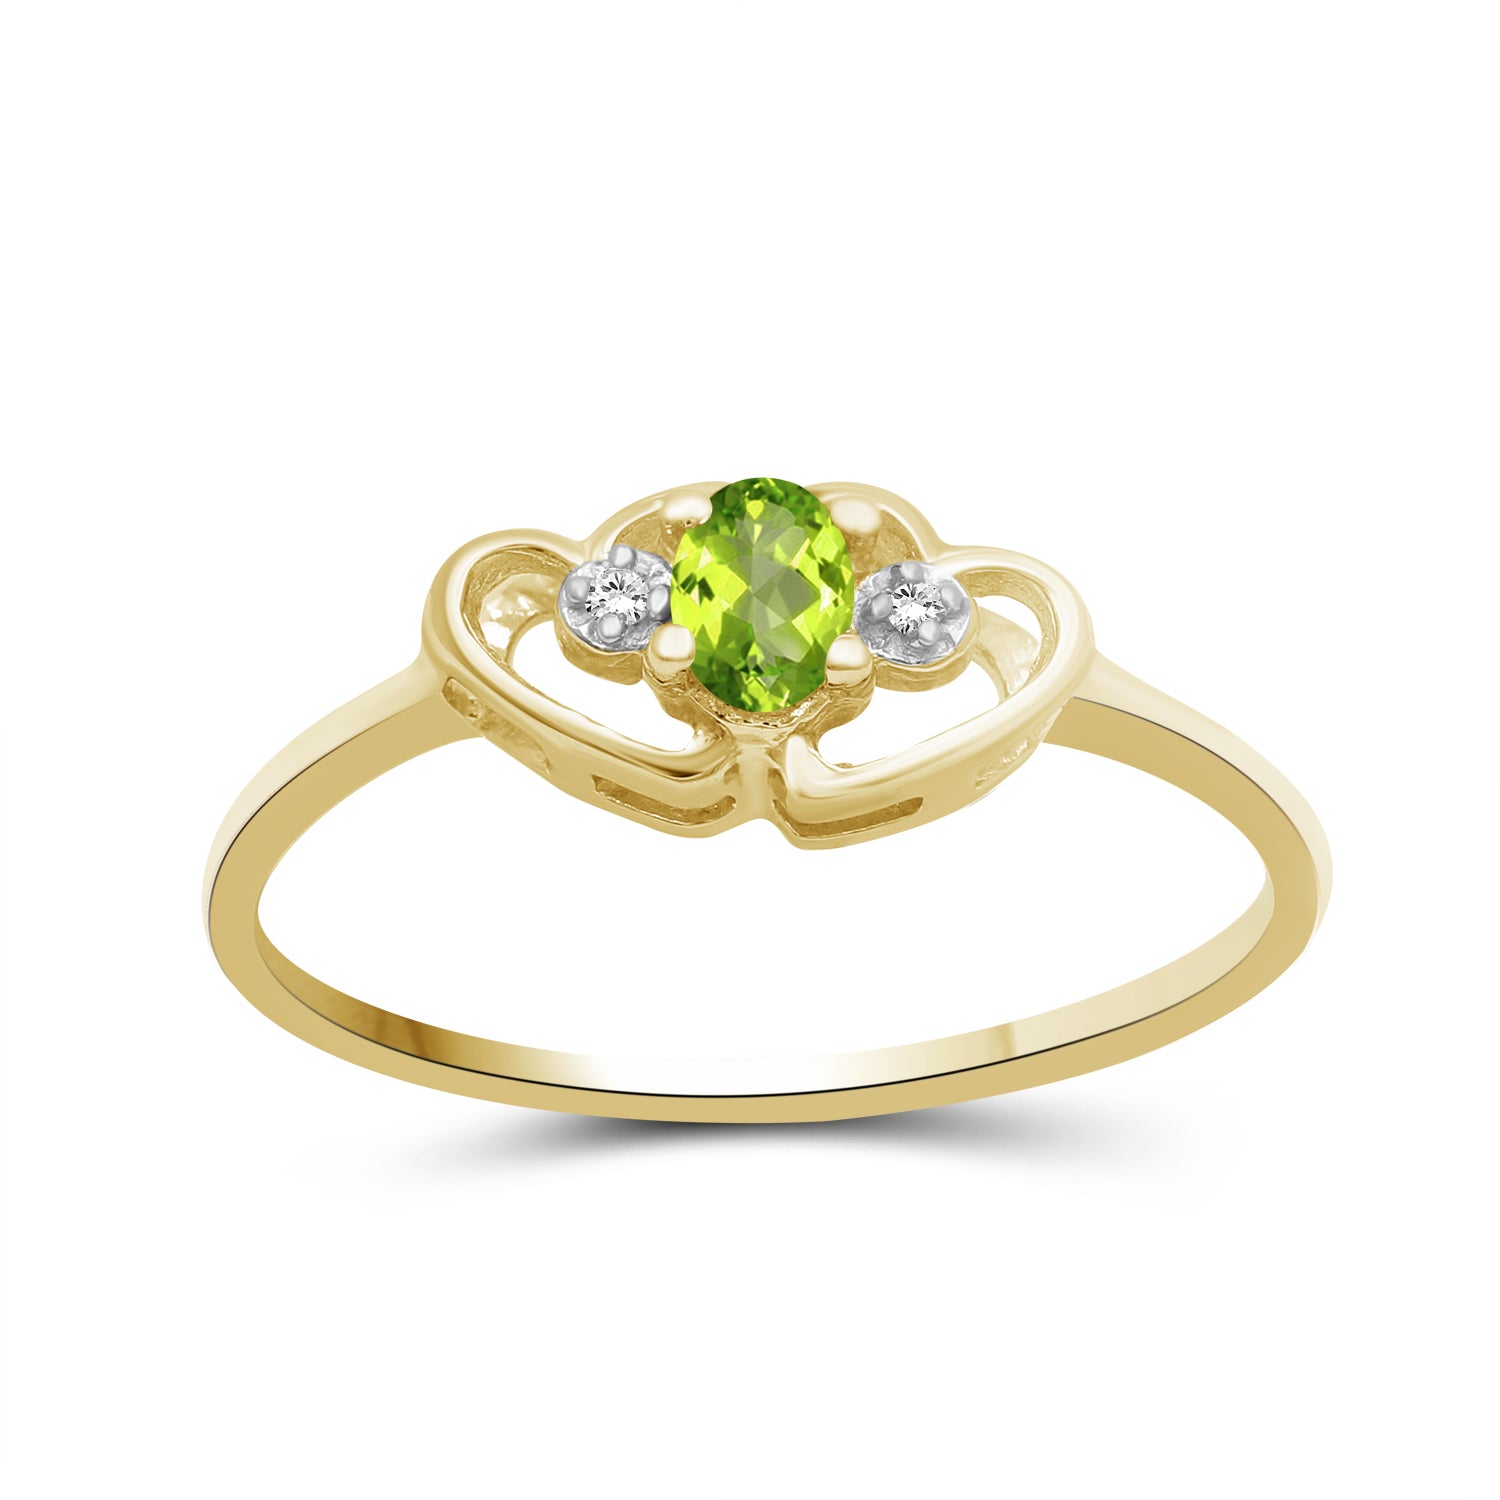 0.19 Carat T.G.W. Peridot Gemstone and White Diamond Accent 14K Gold-plated Ring